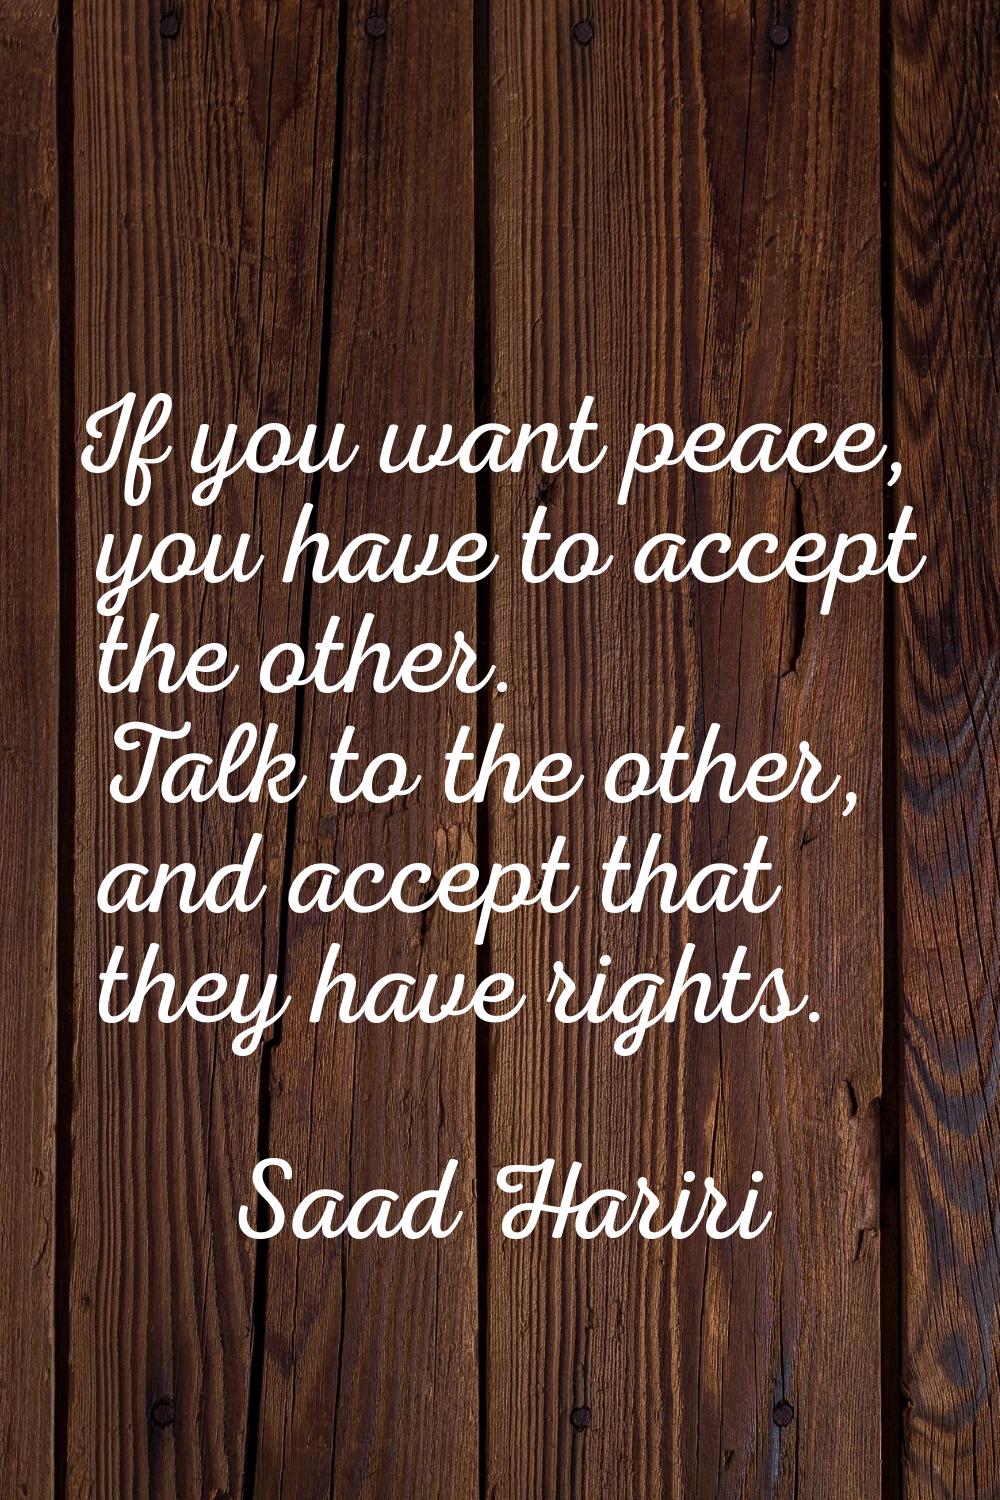 If you want peace, you have to accept the other. Talk to the other, and accept that they have right